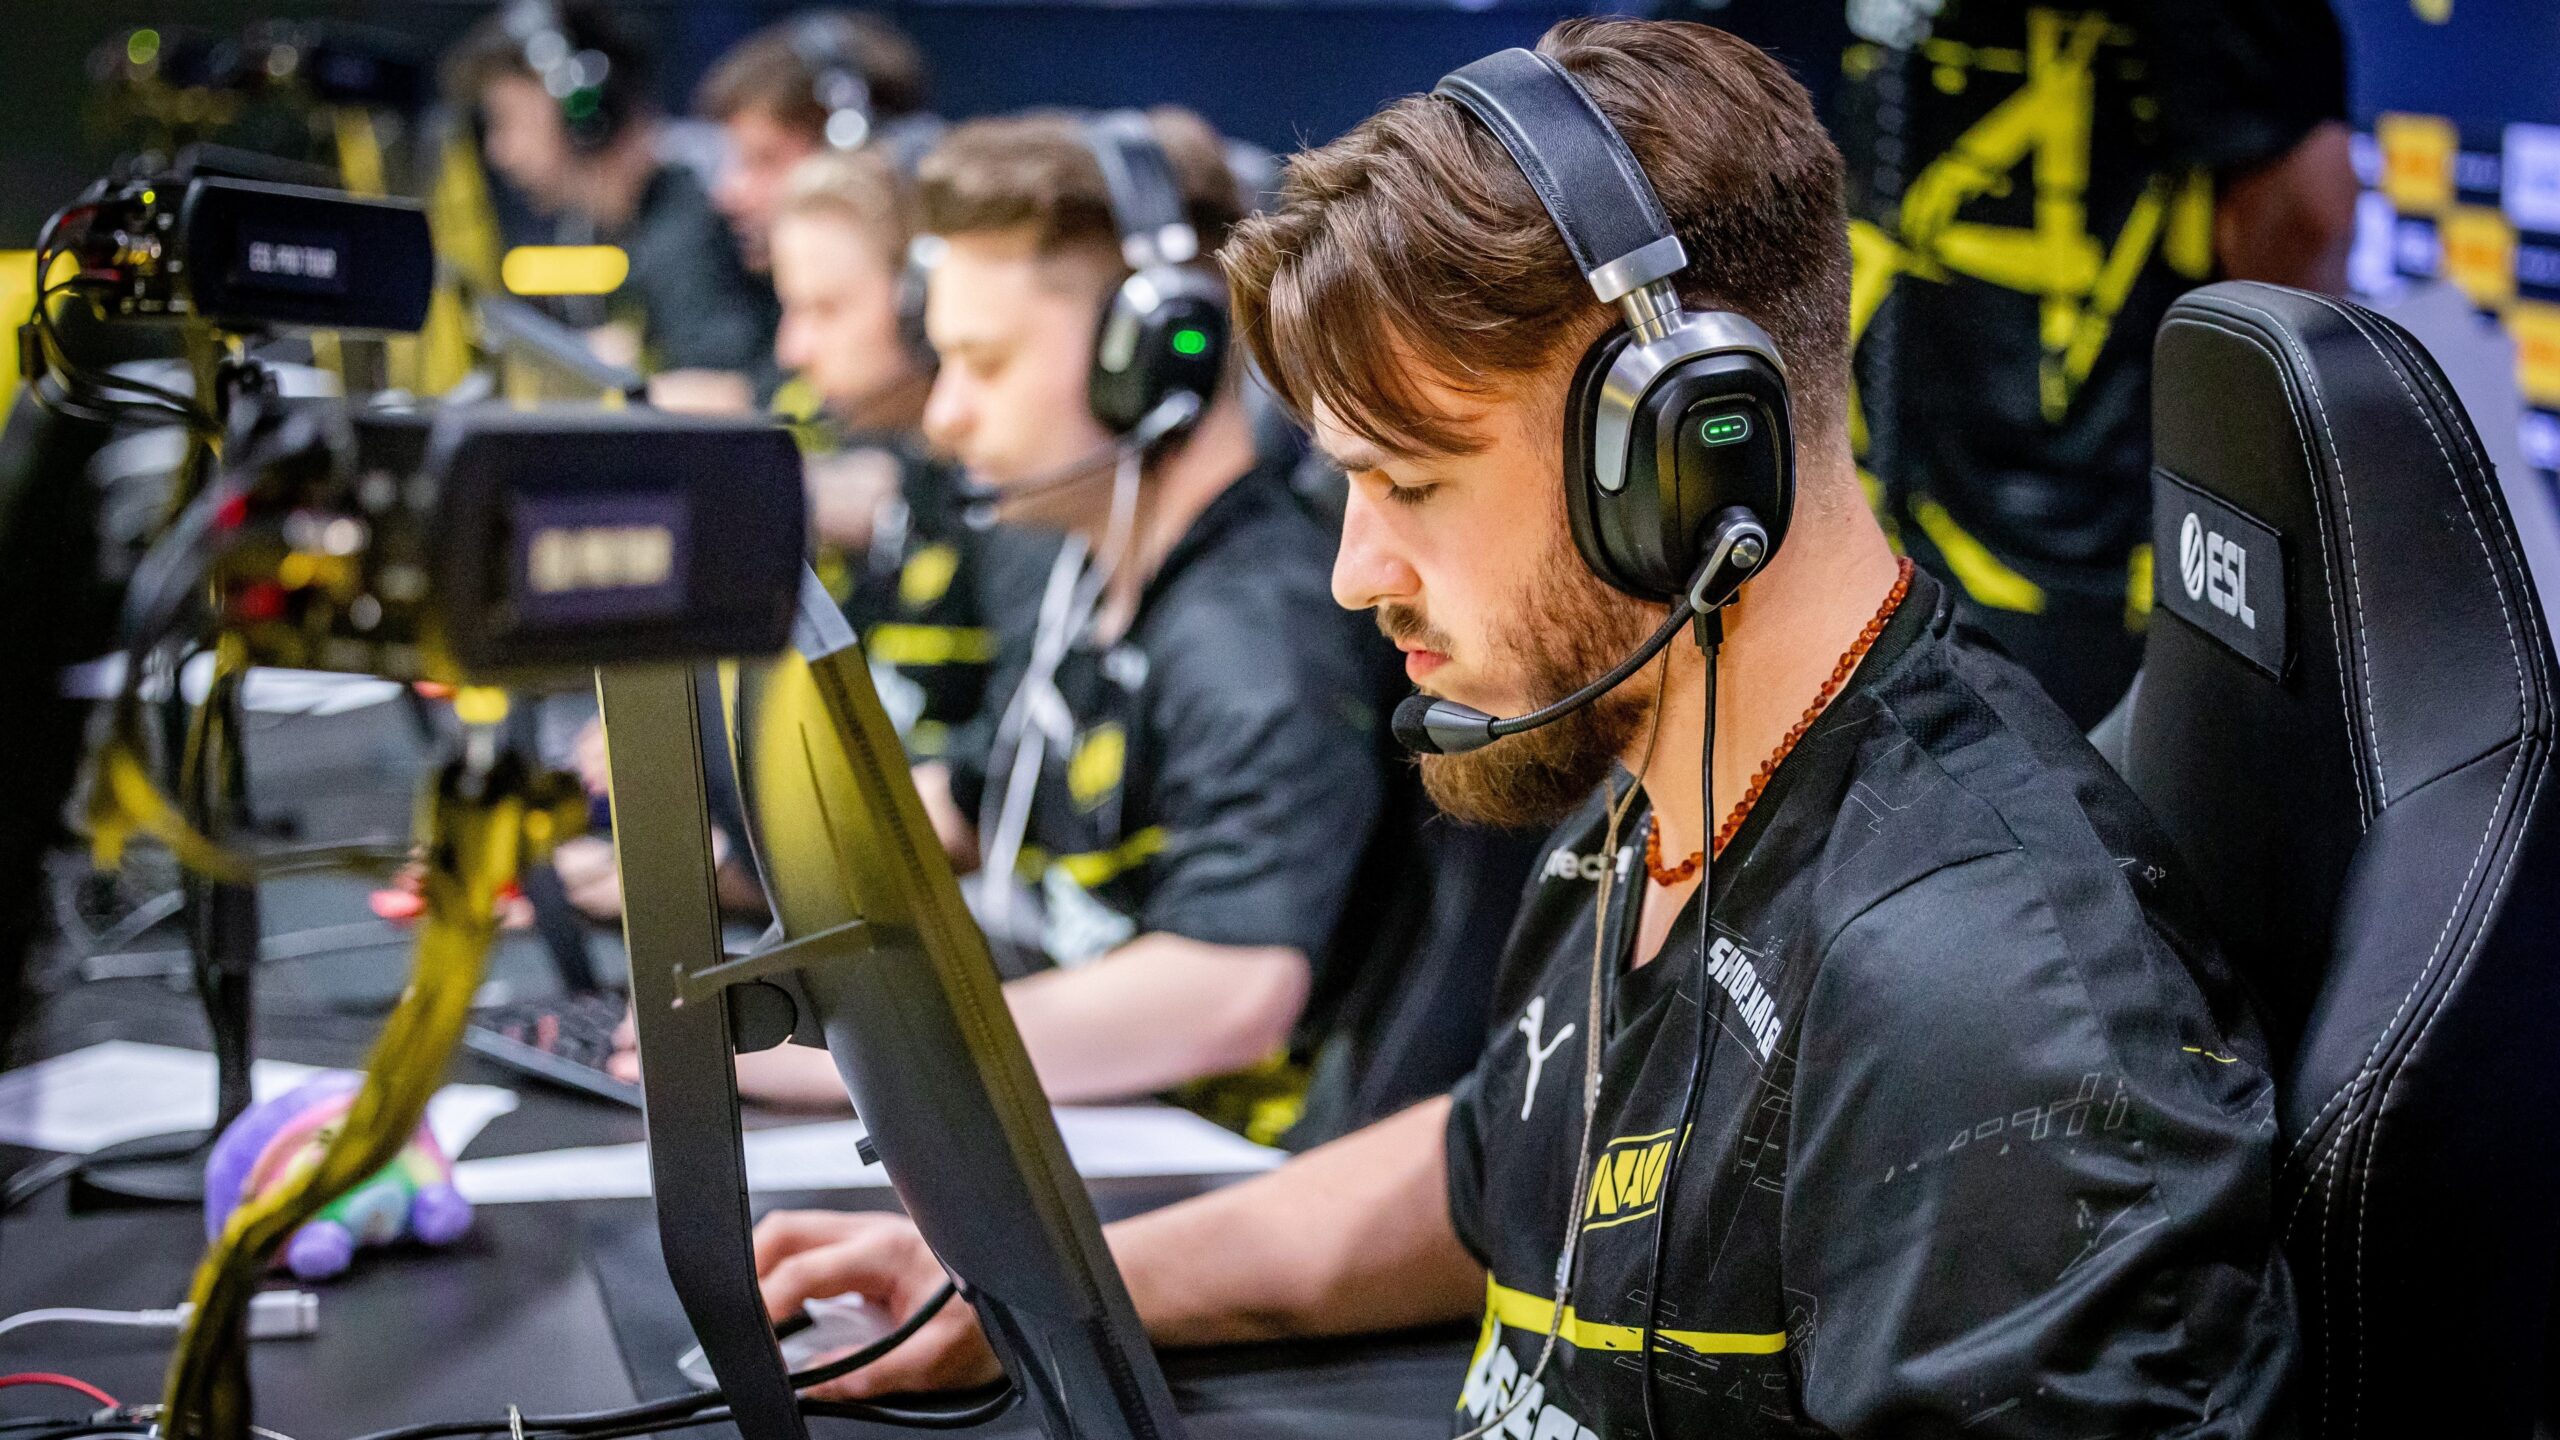 NAVI crumbles down after a 9 year streak of appearances at IEM Cologne playoffs - CS GO